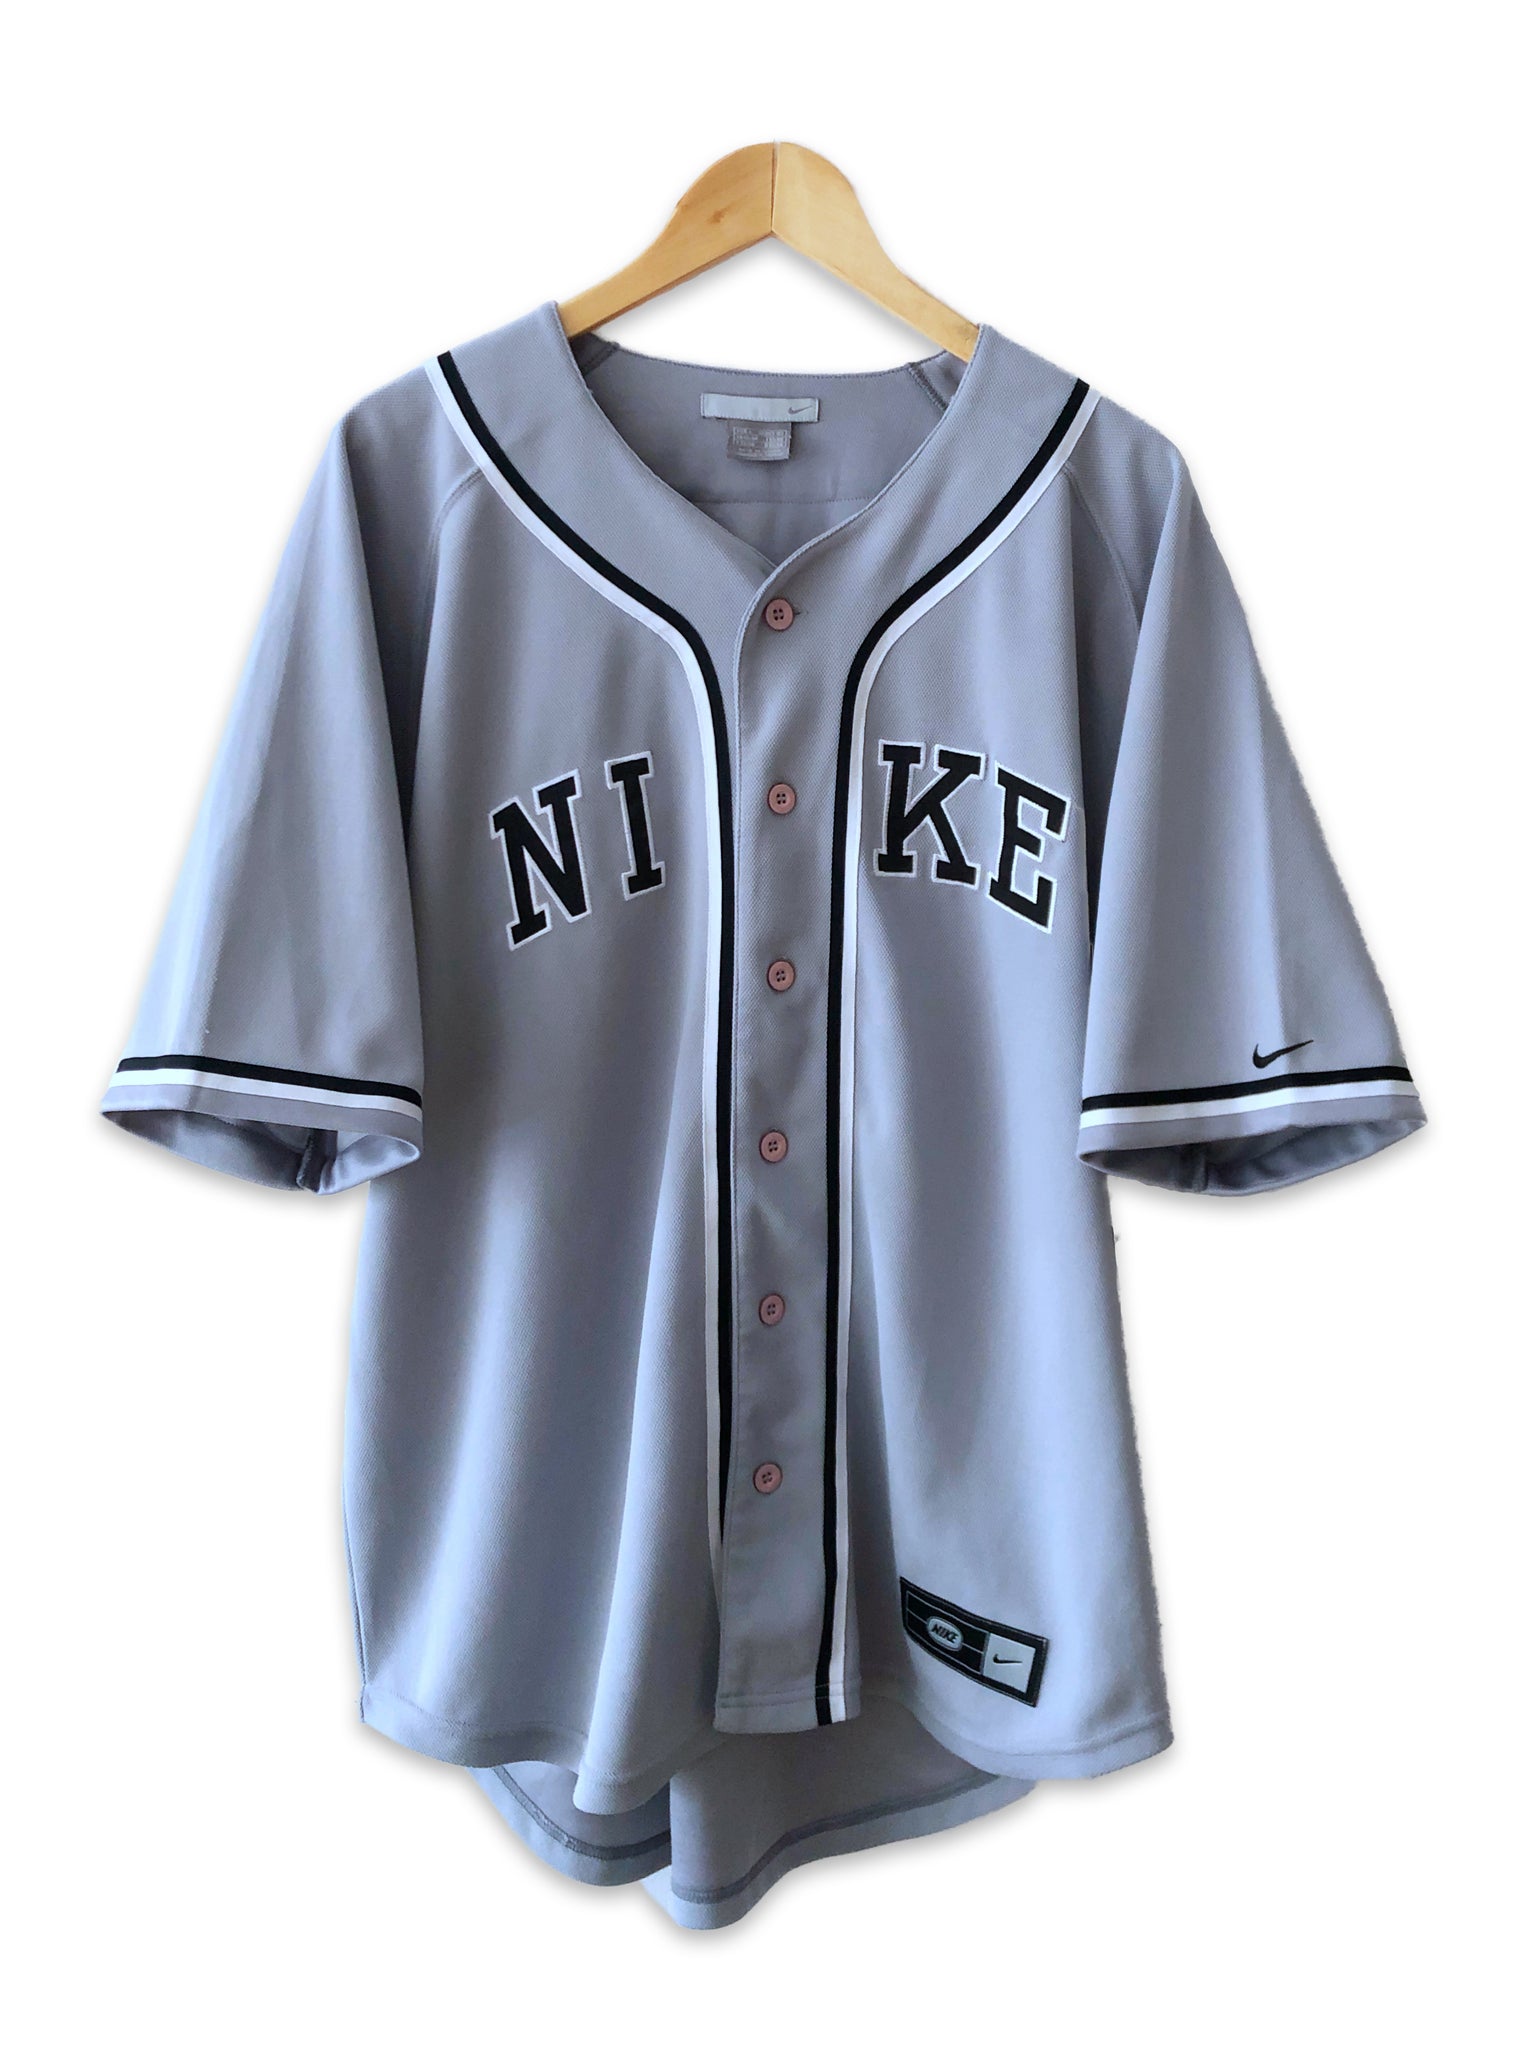 Vintage 00s Nike Spell Out Baseball 